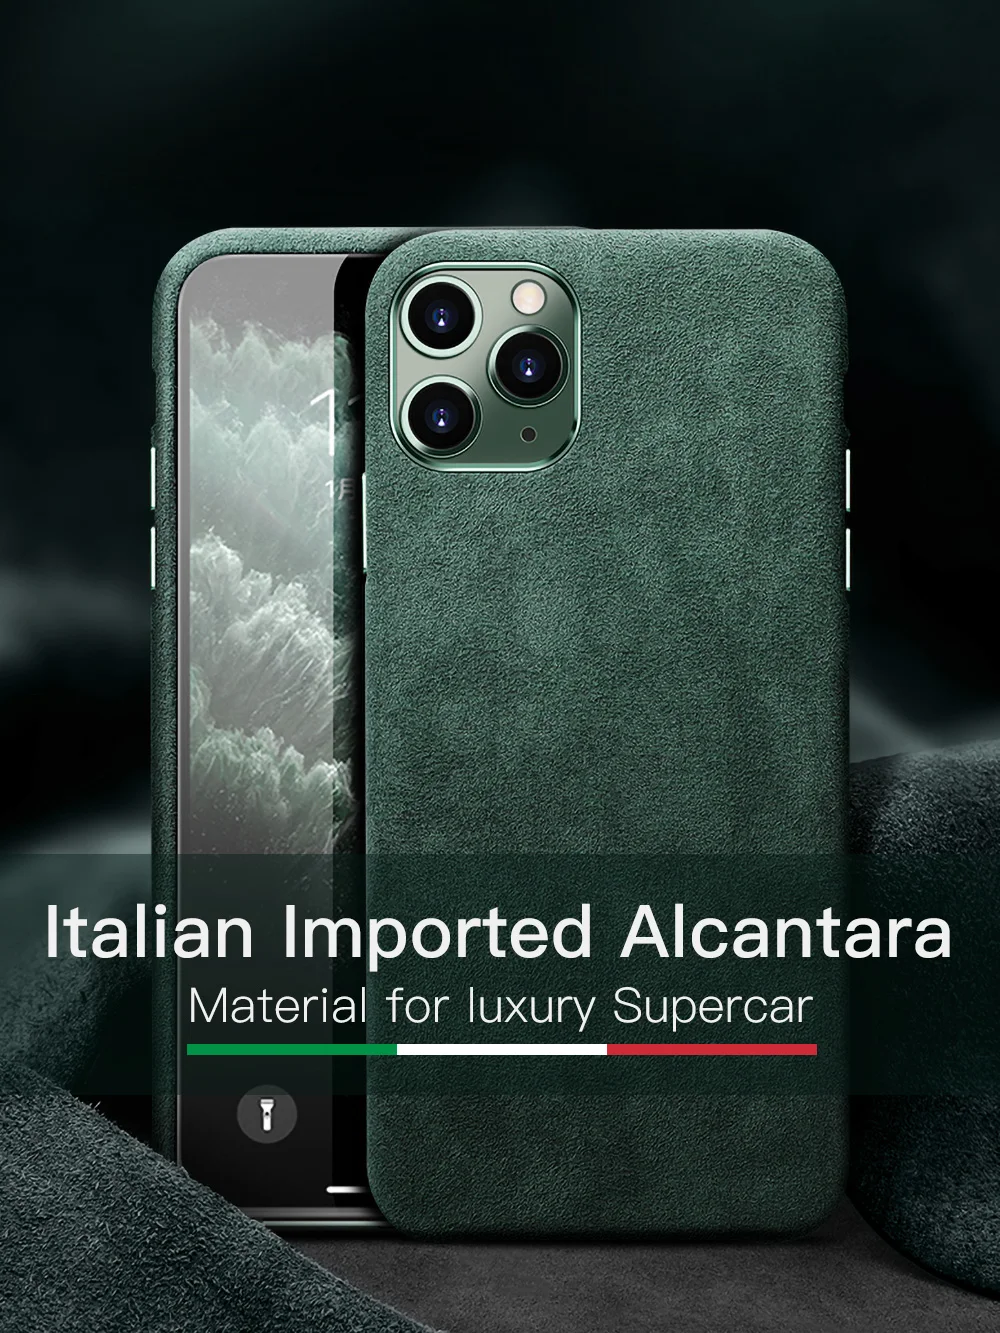 Luxurious Italian Alcantara Case for iPhone 12 Pro Max 11 Xr X Xs Max 6s 7 8 Plus Luxury Artificial Leather Business Phone Cases SE2 Cover